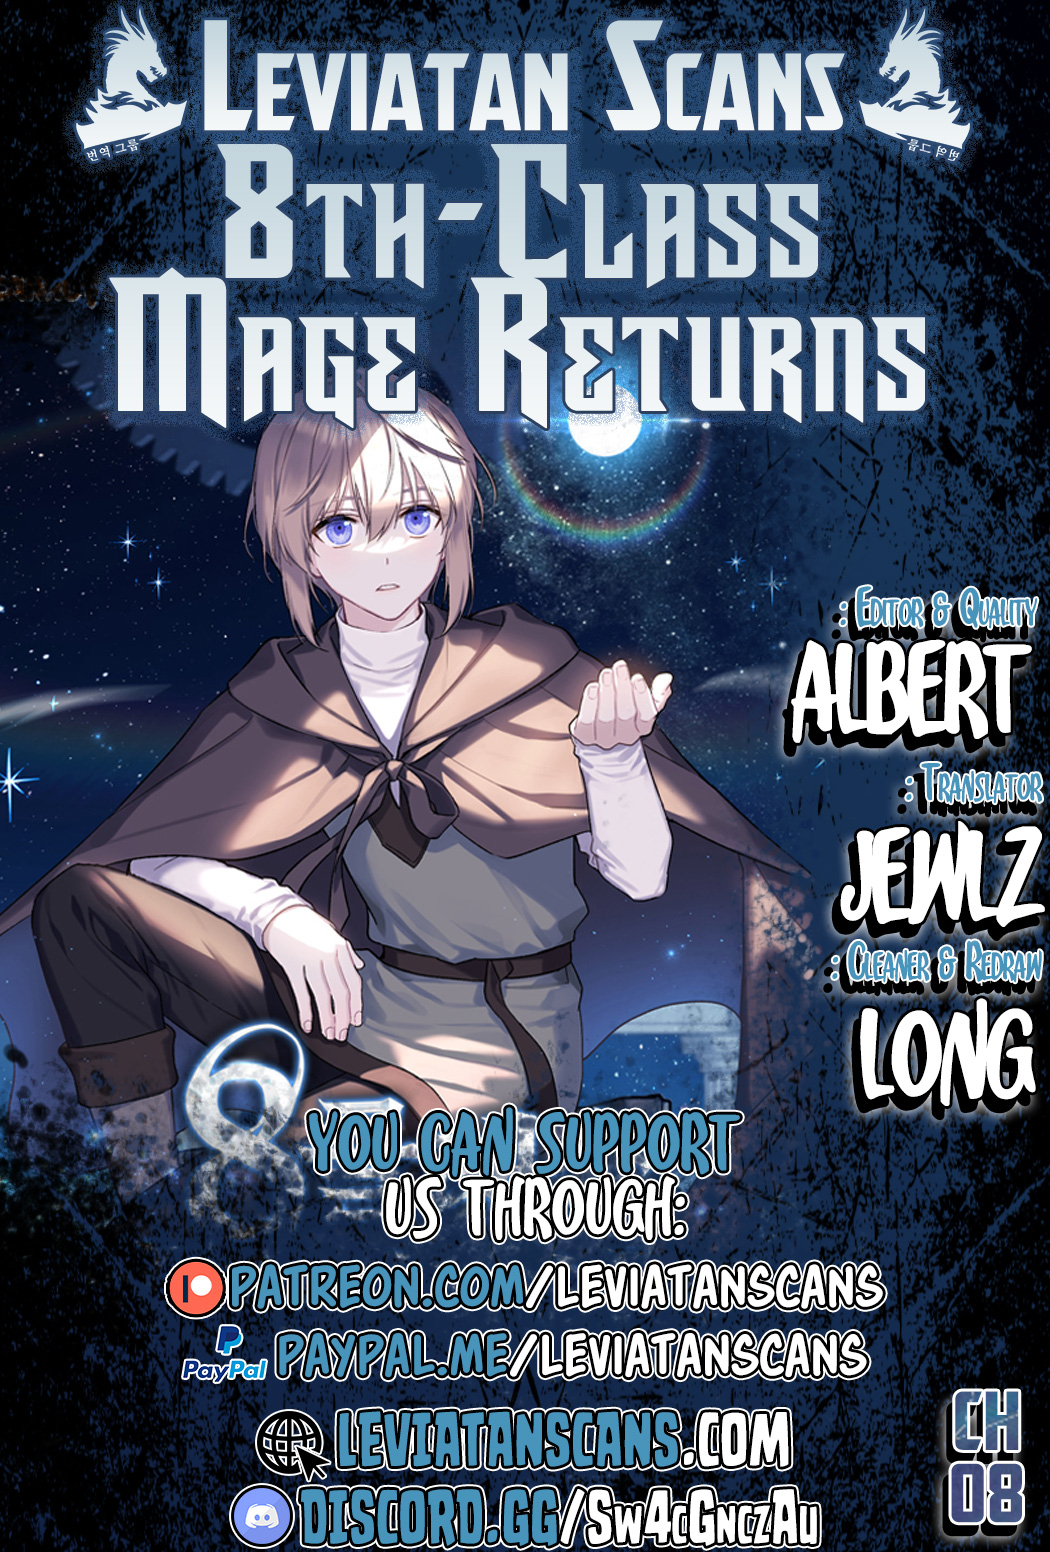 Return of the 8th Class Magician - Chapter 7127 - Image 1